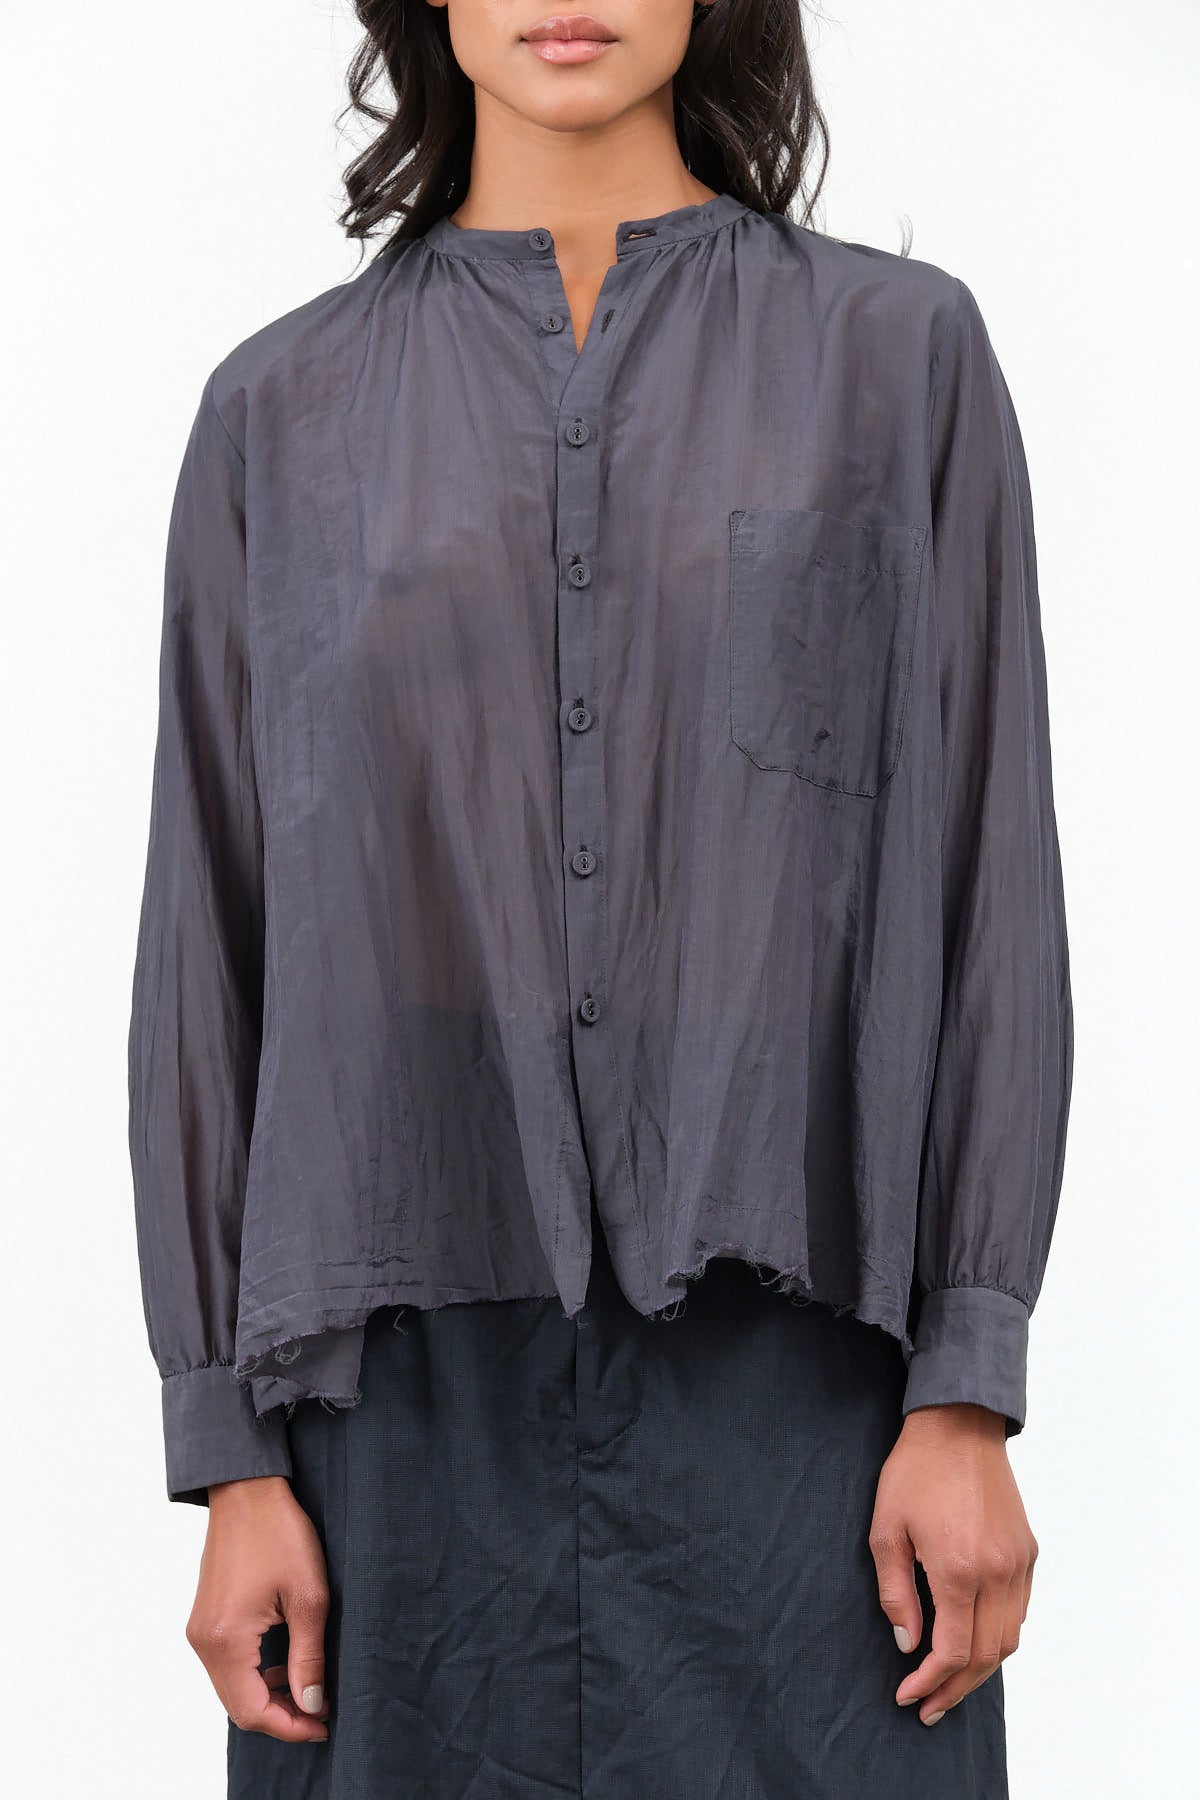 Botanical Dye Blouse with Front Pocket by Pas de Calais in Green